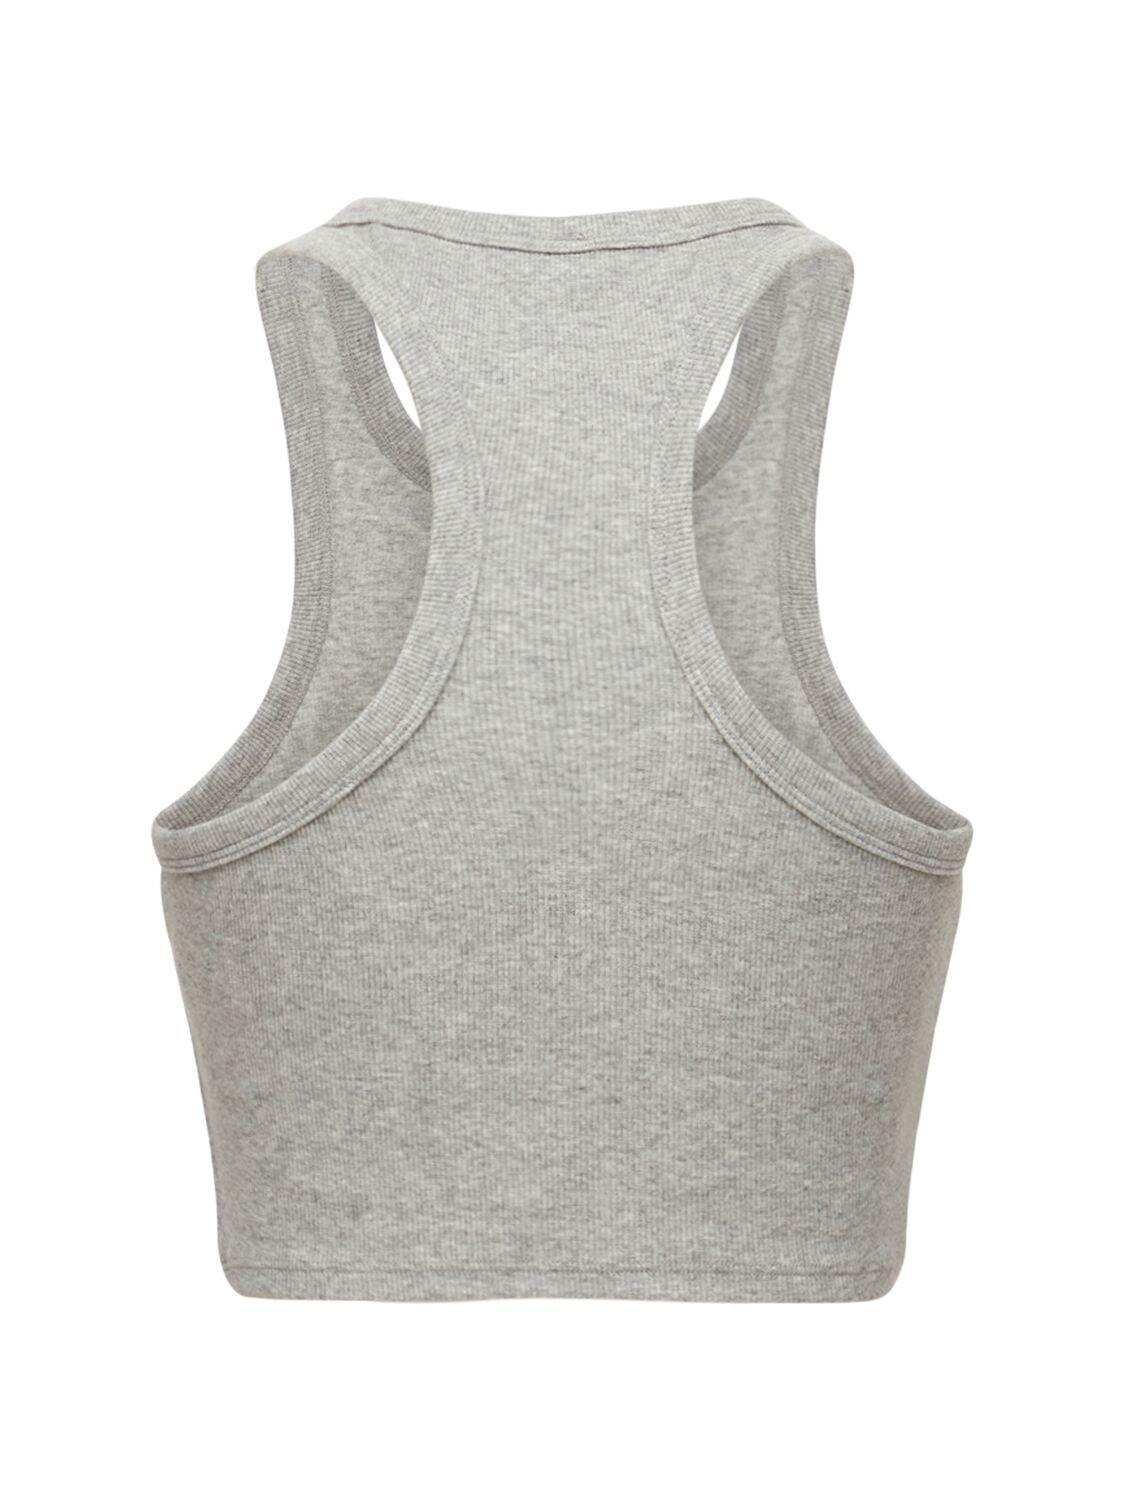 NWOT Alo Aspire Tank  Athletic tank tops, Clothes design, Tank